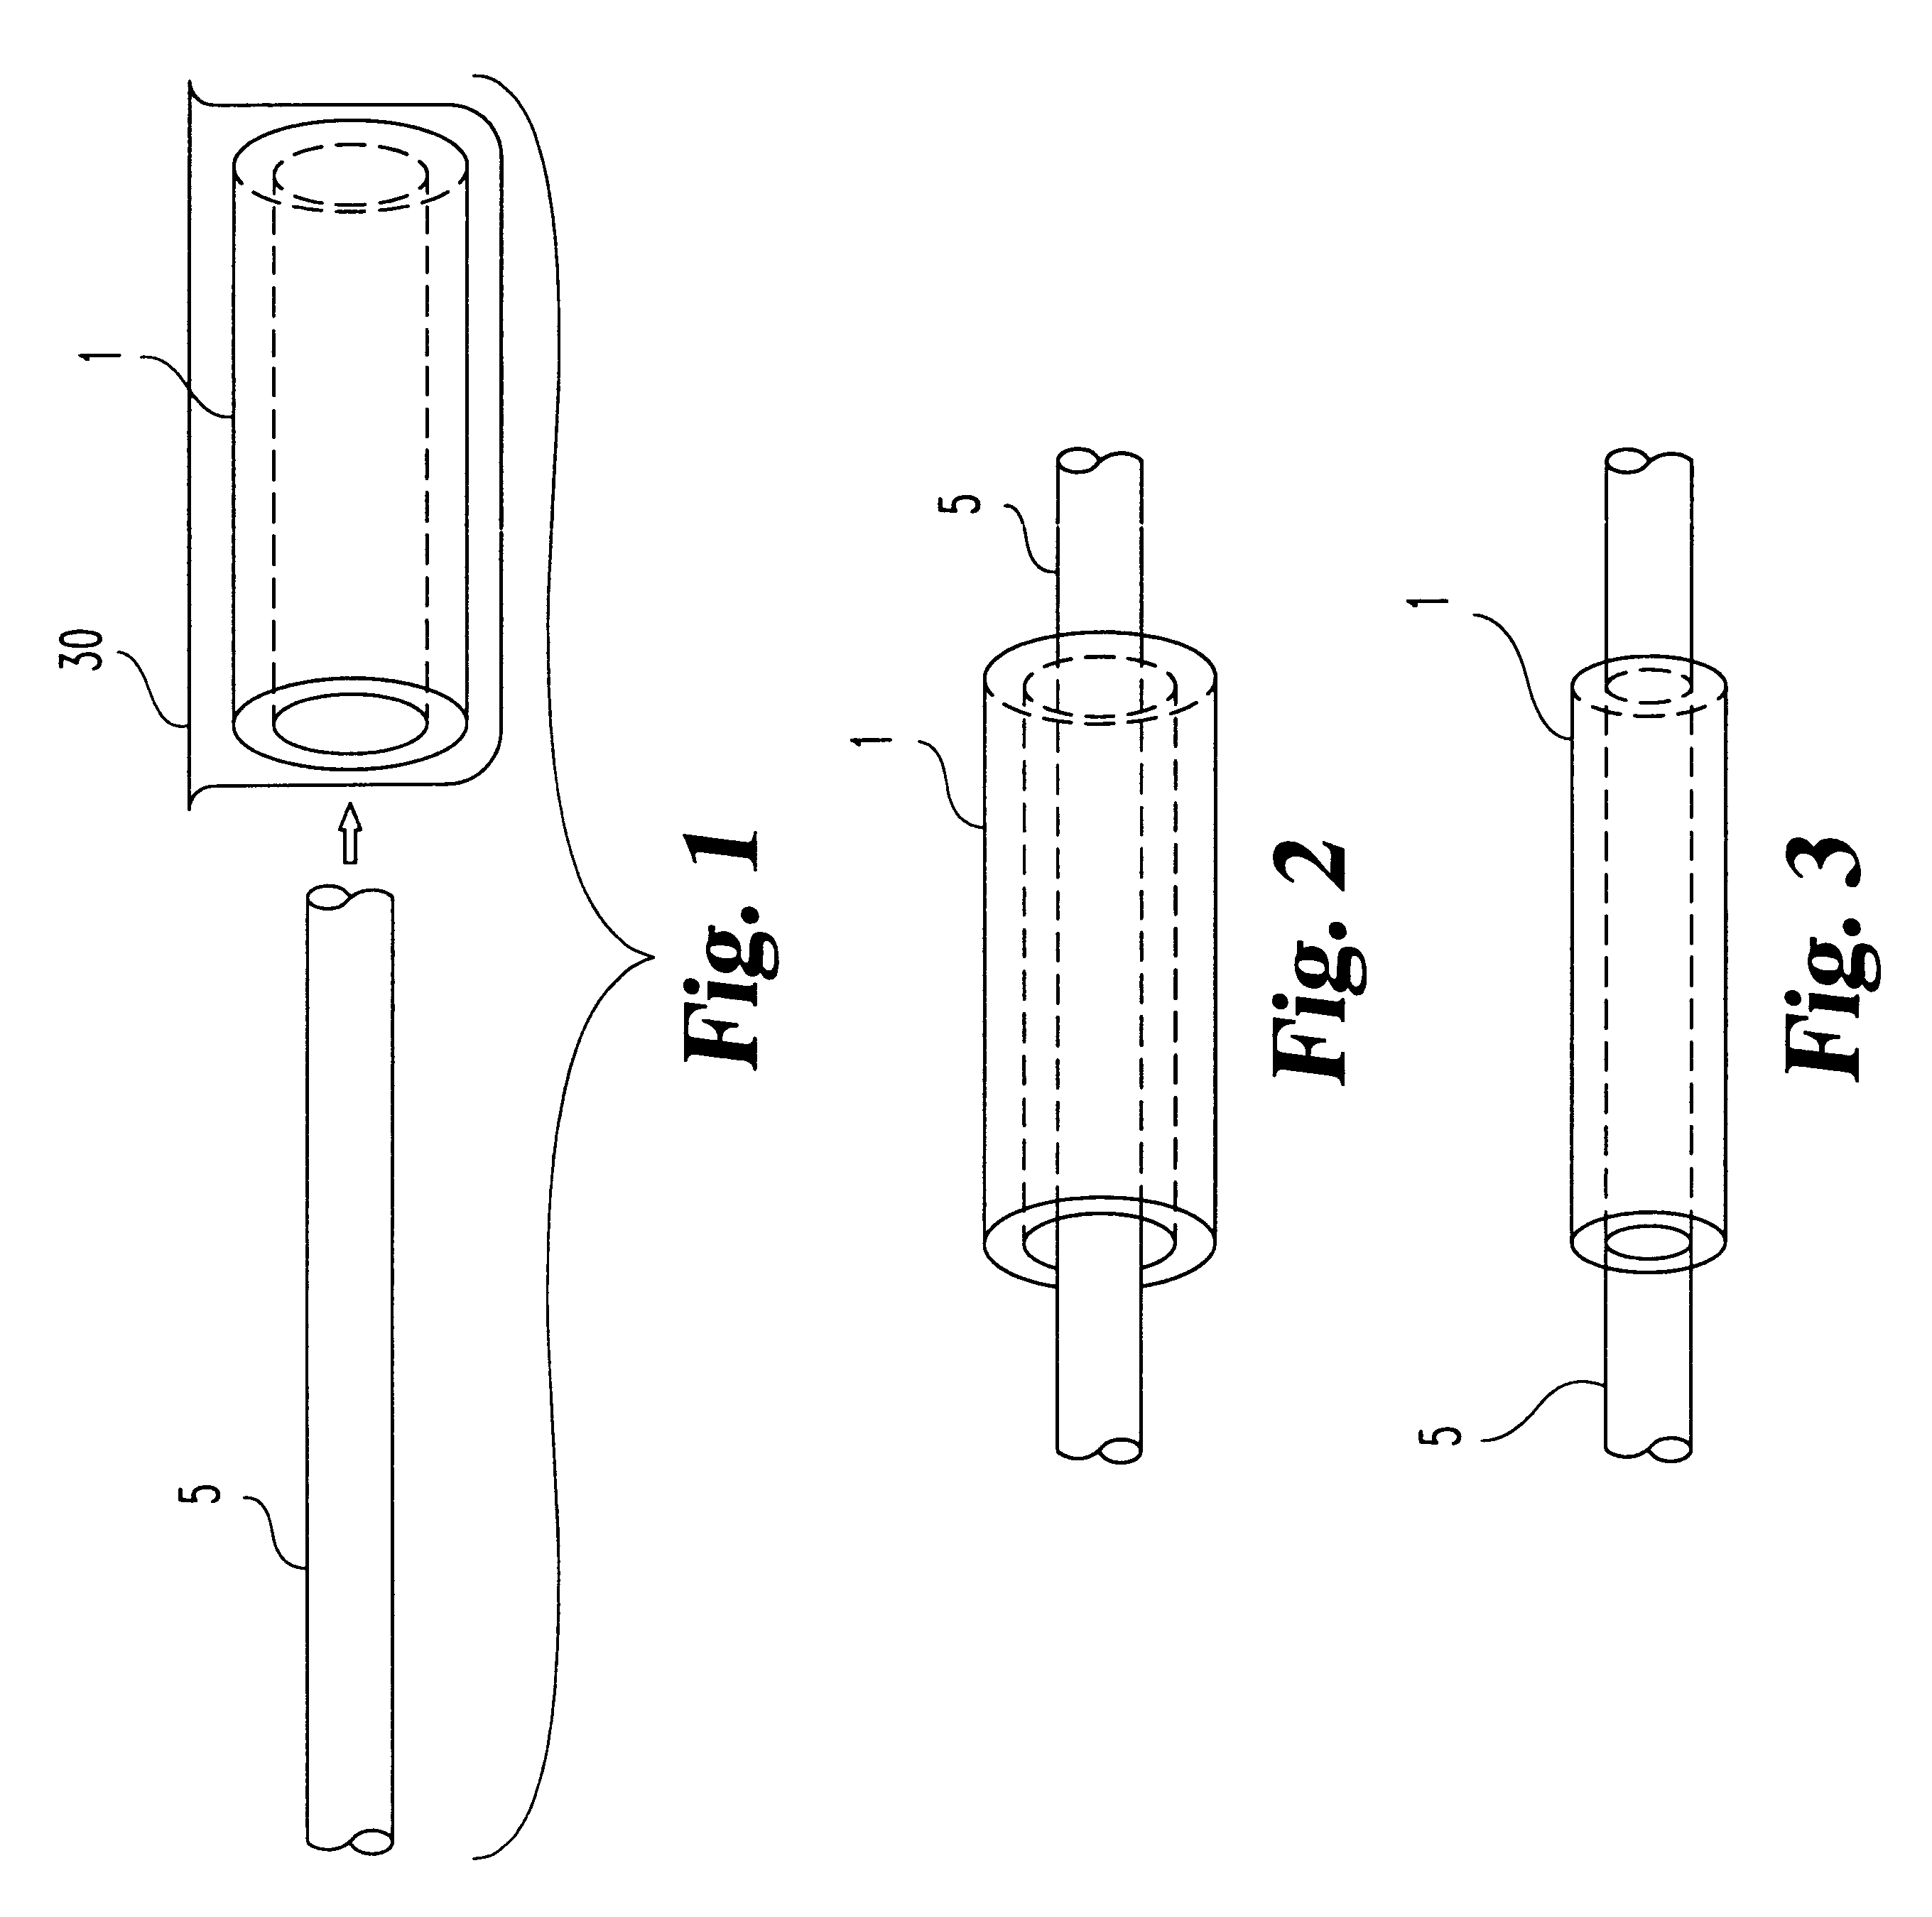 Methods for attaching an elastomeric sleeve to an elongate article